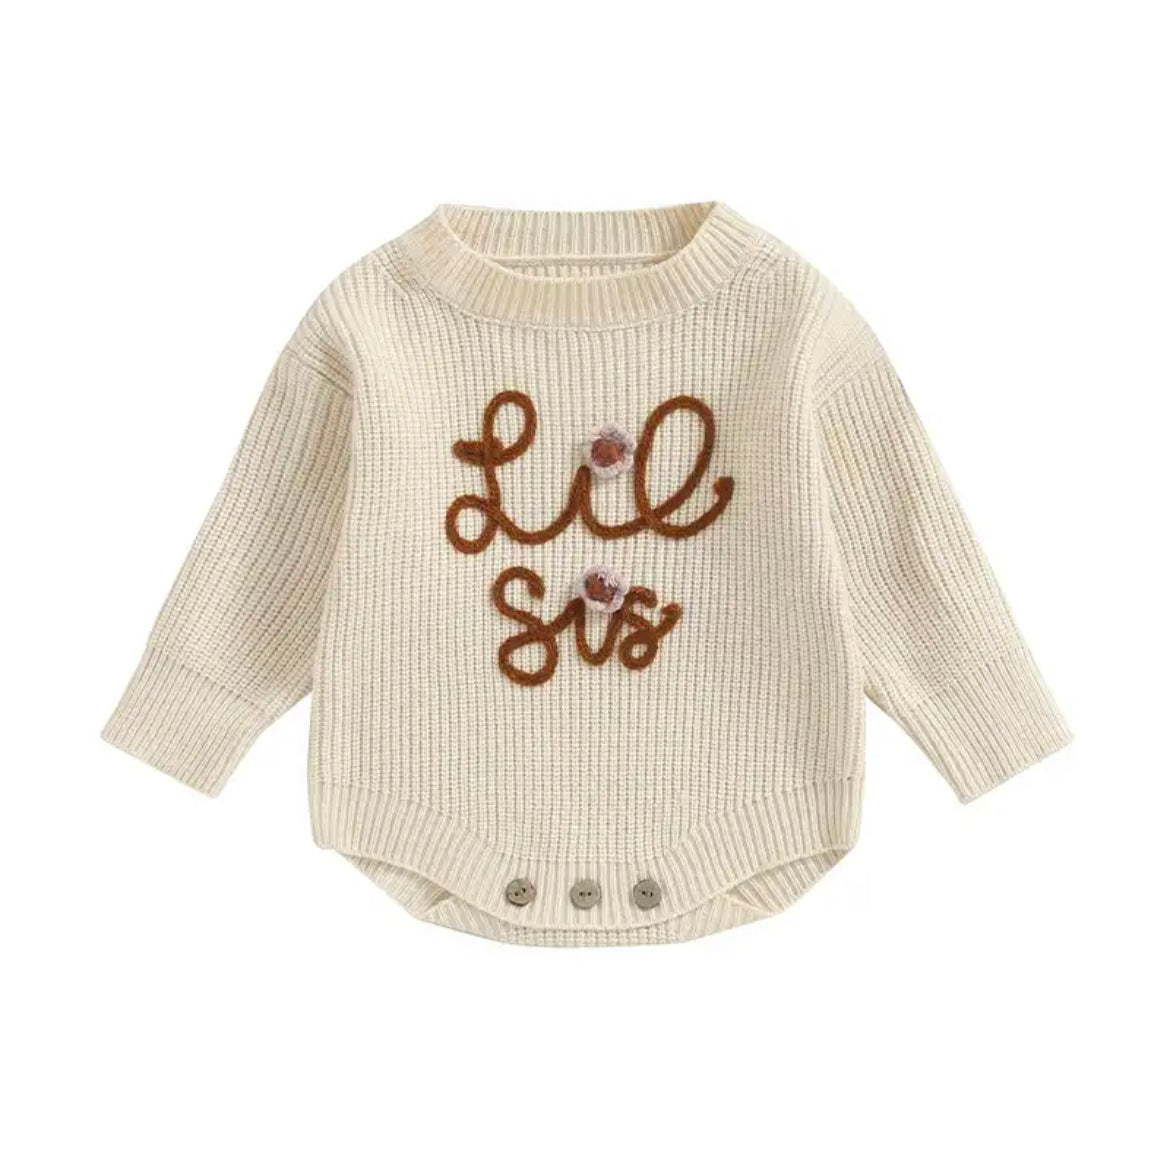 'Lil Sis' Embroidered Knit Sweater